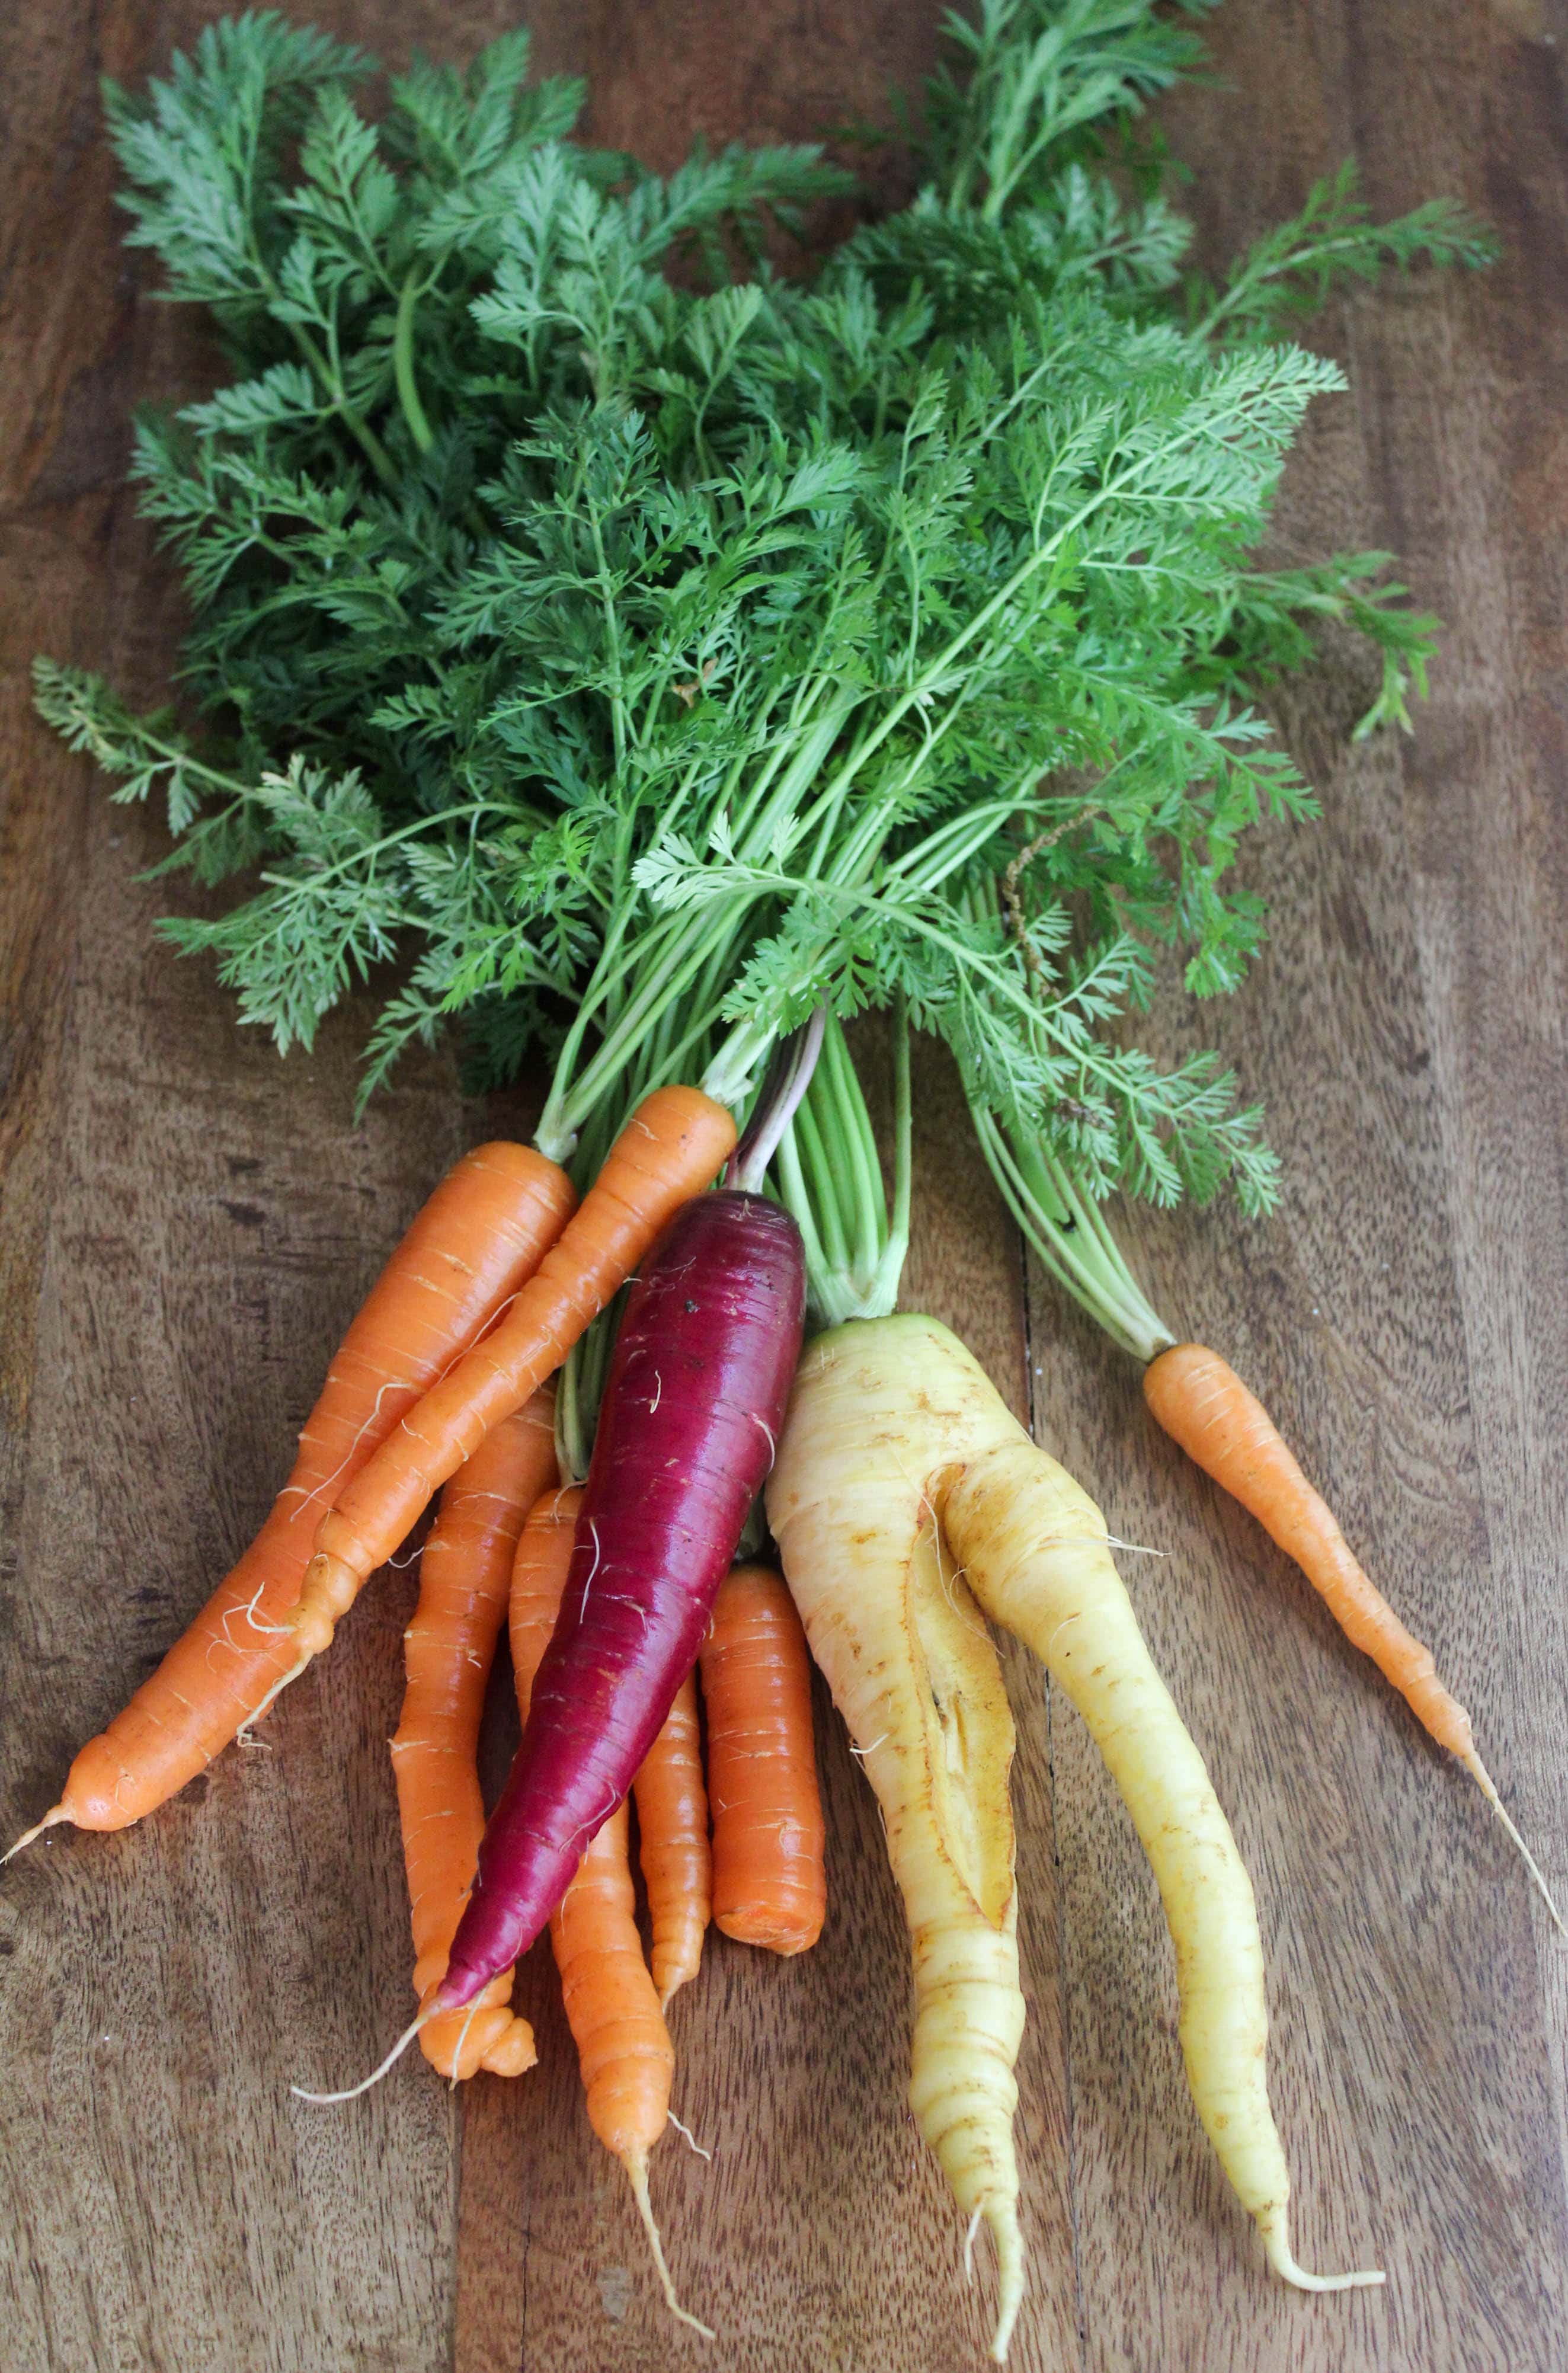 whole carrots with green tops